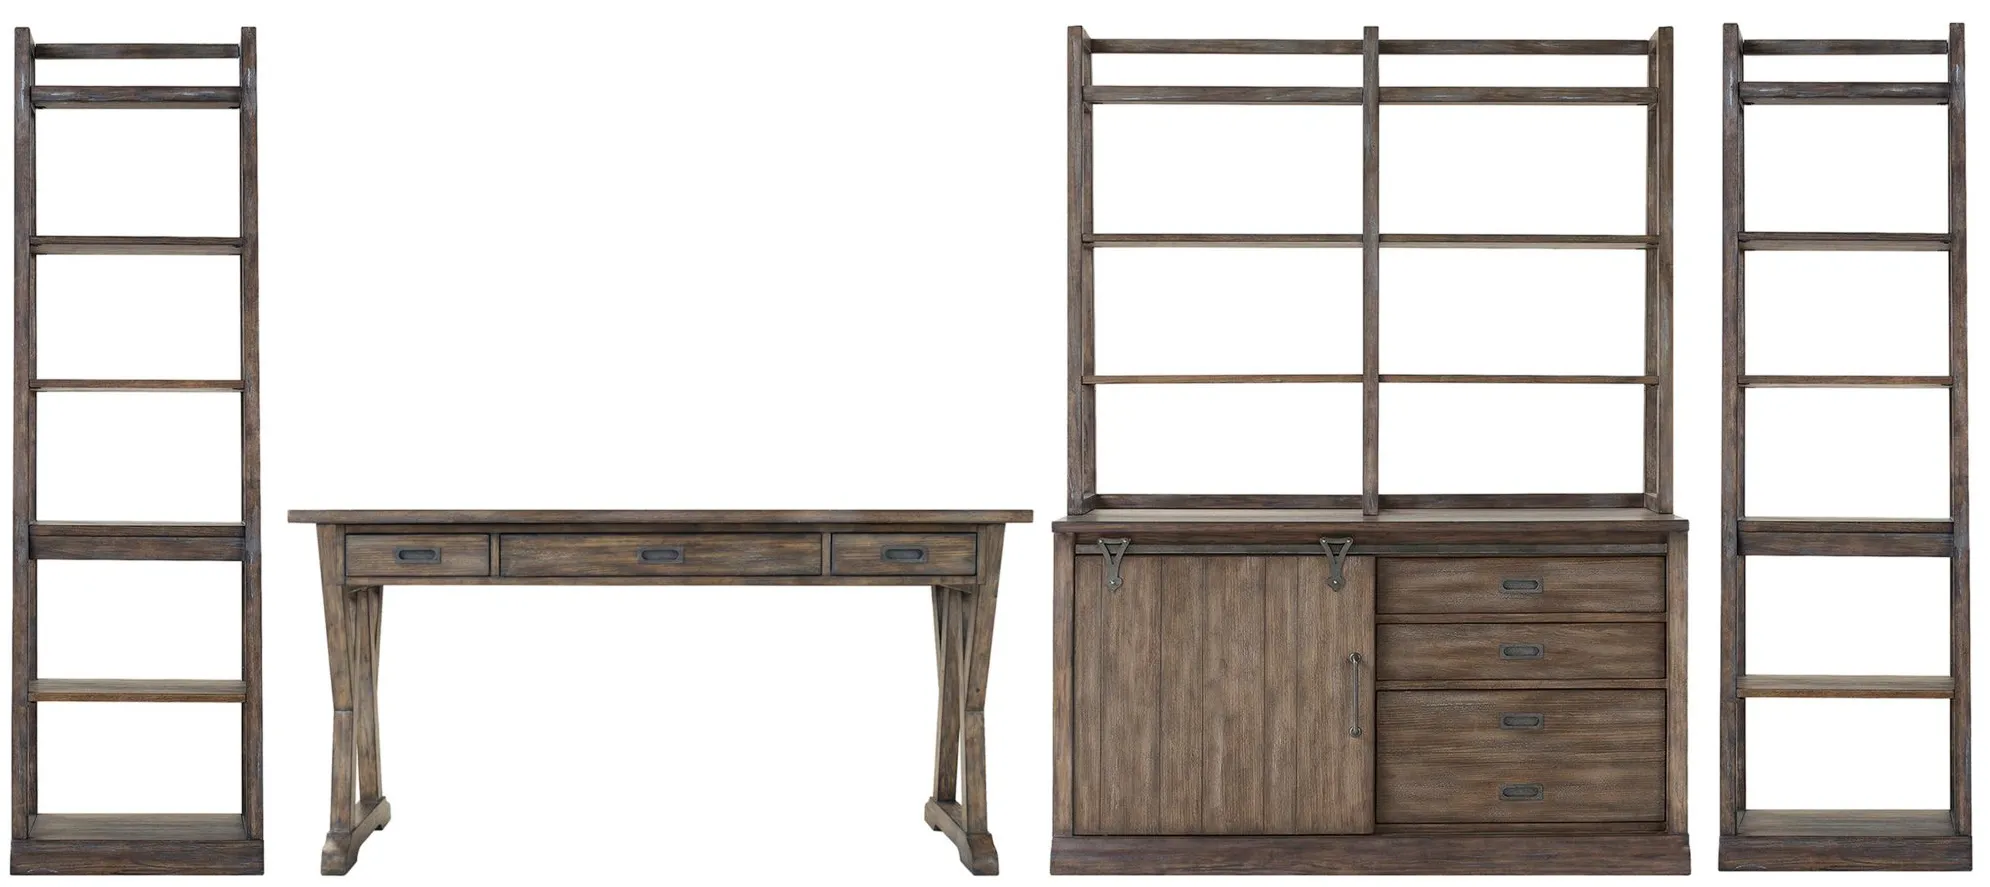 Wyatt 5-pc. Home Office Set in Rustic Saddle by Liberty Furniture